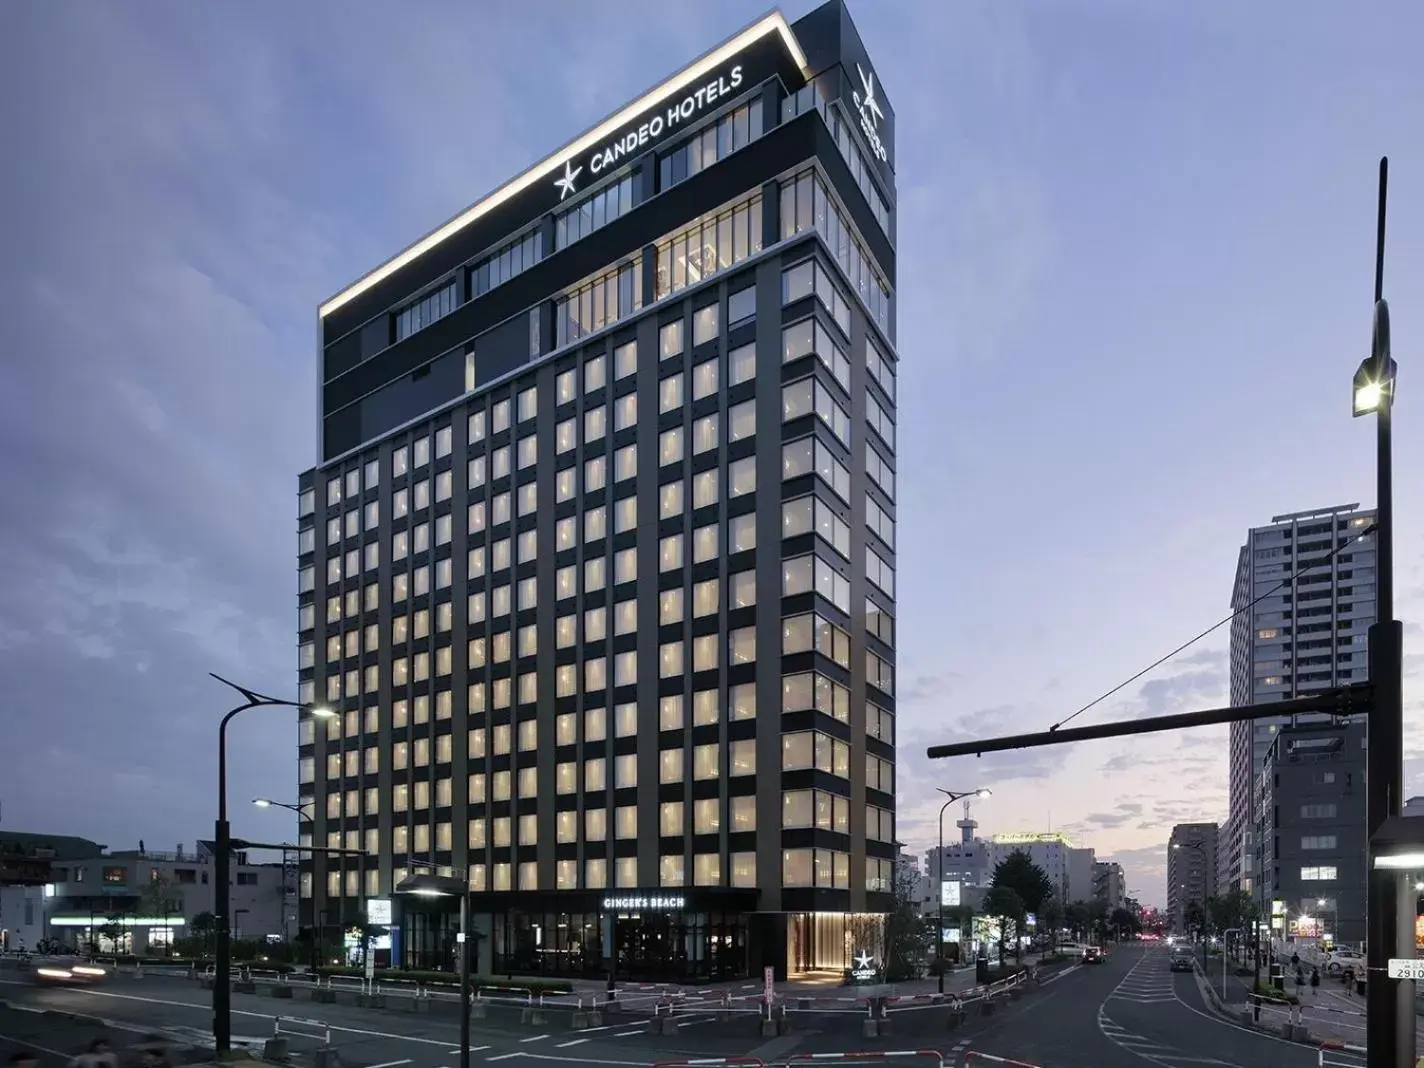 Property Building in Candeo Hotels Omiya